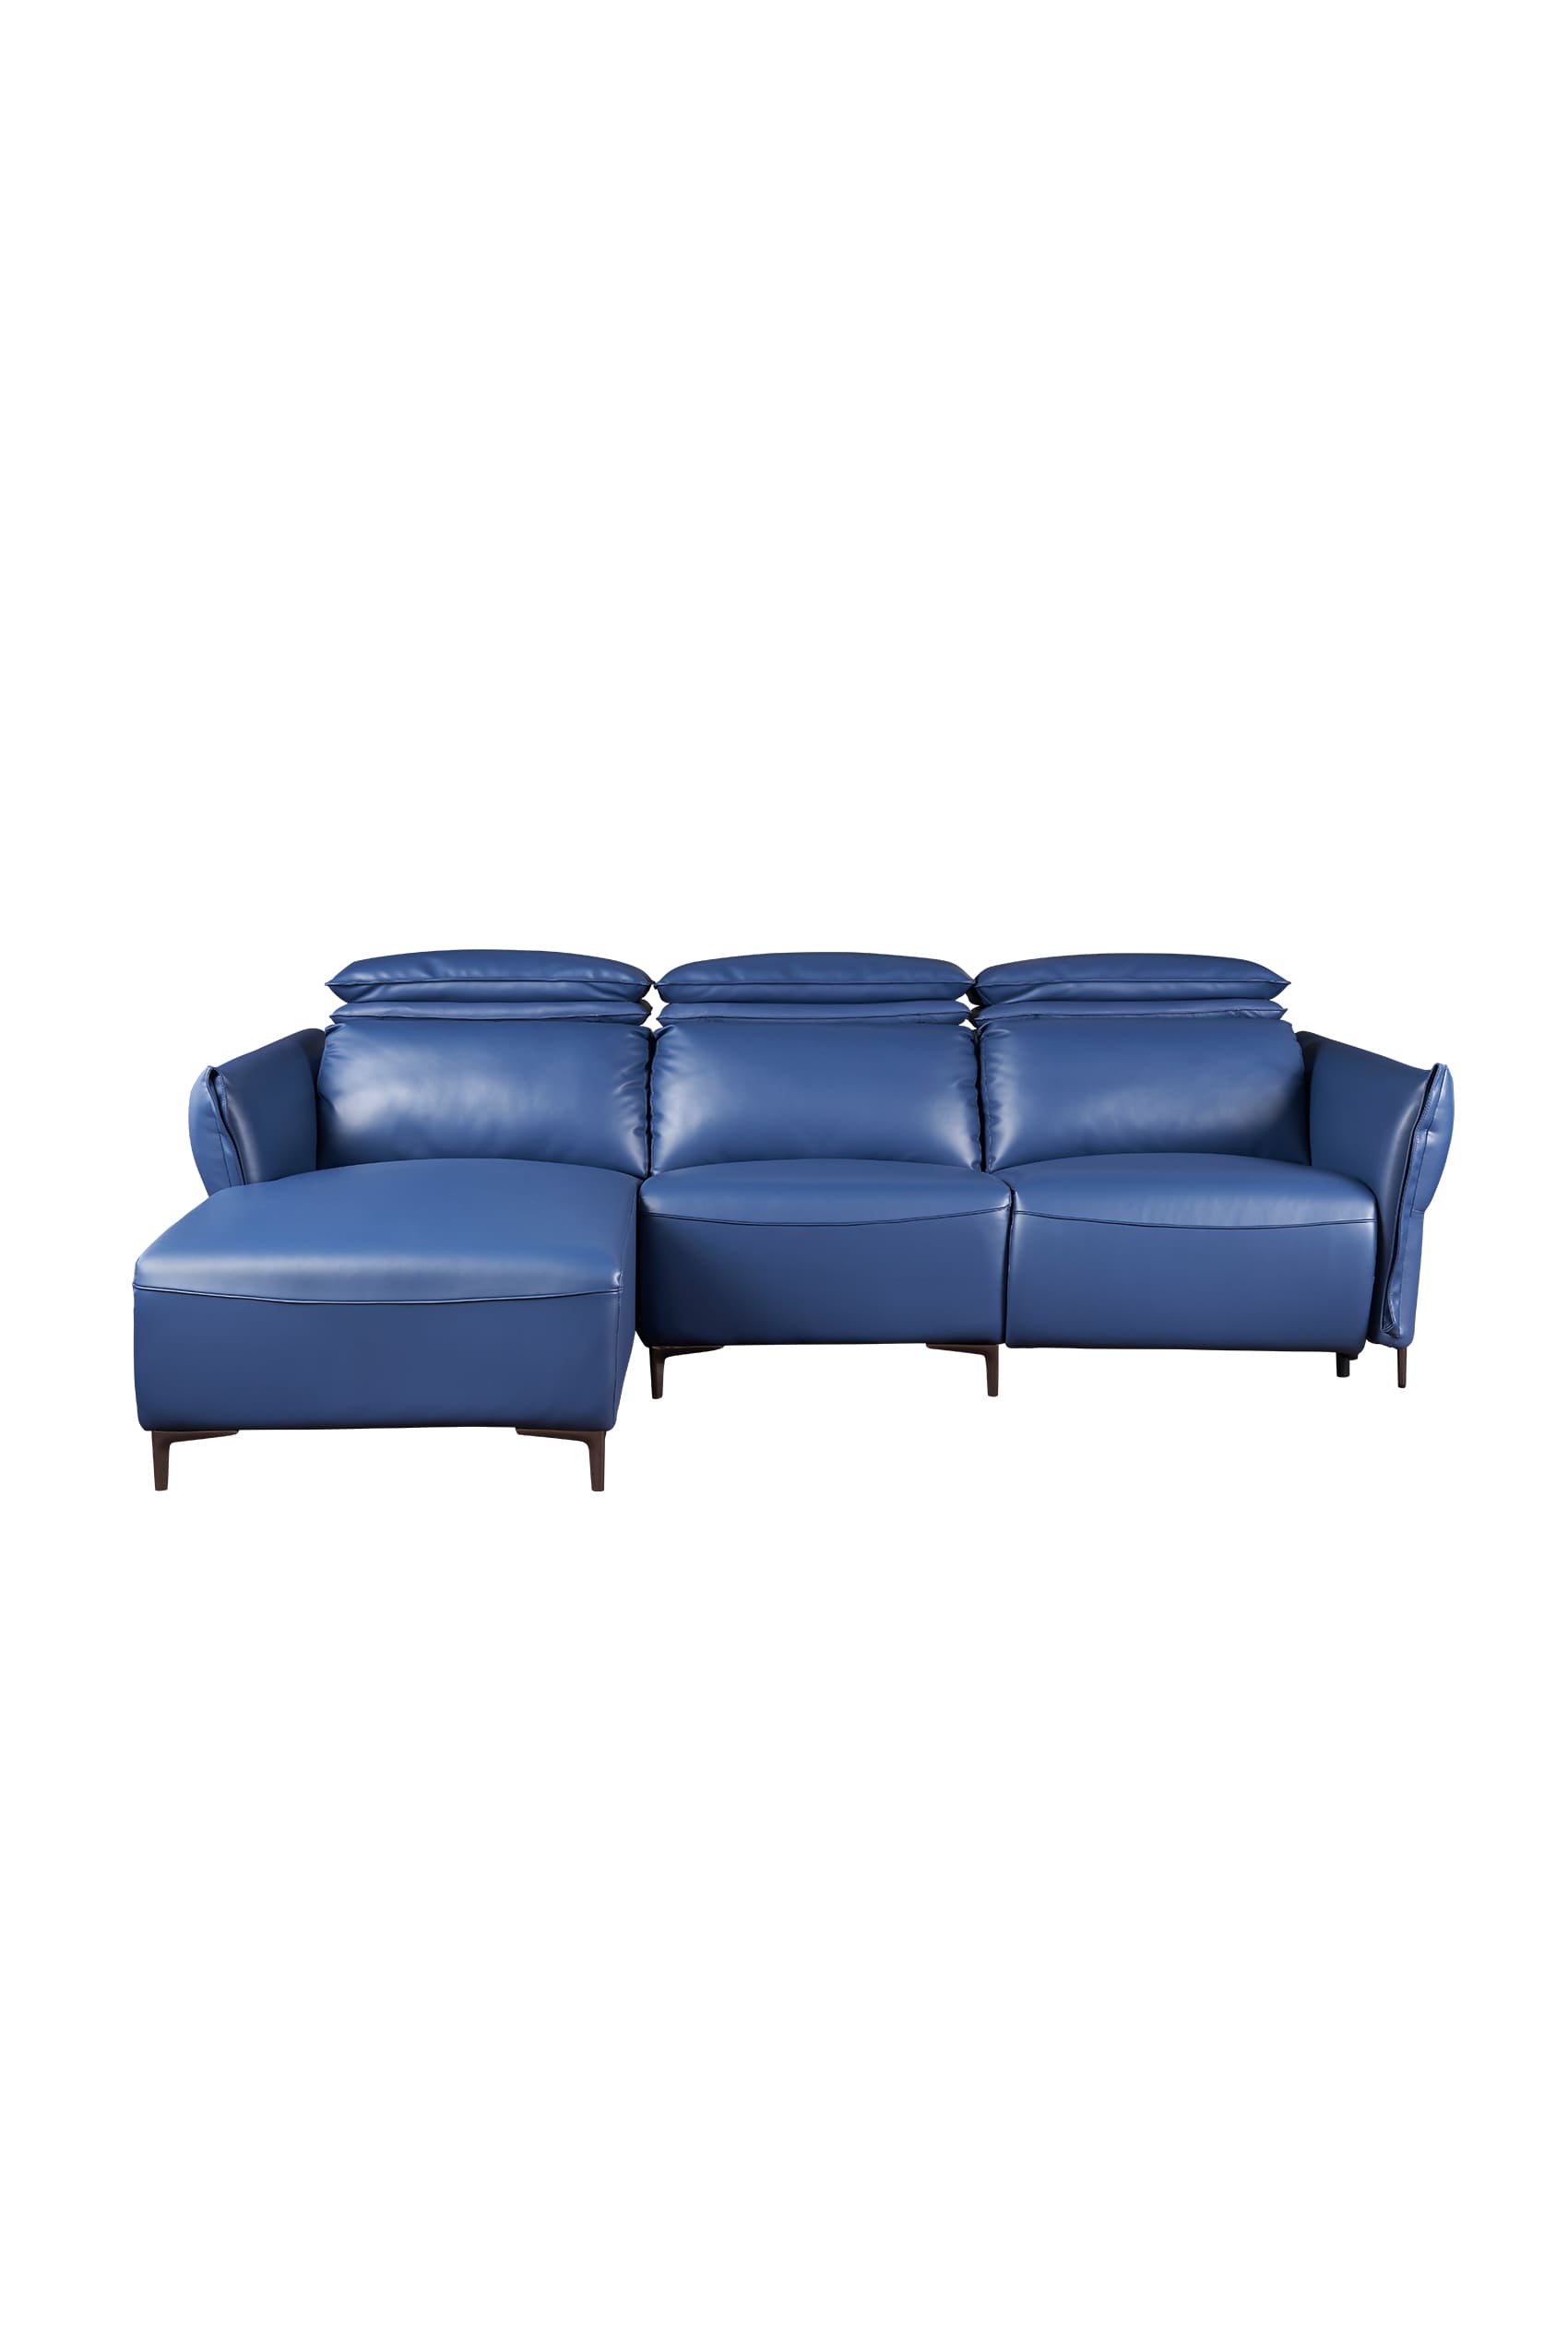 Sarnano L-Shape Leather Sofa with Recliner